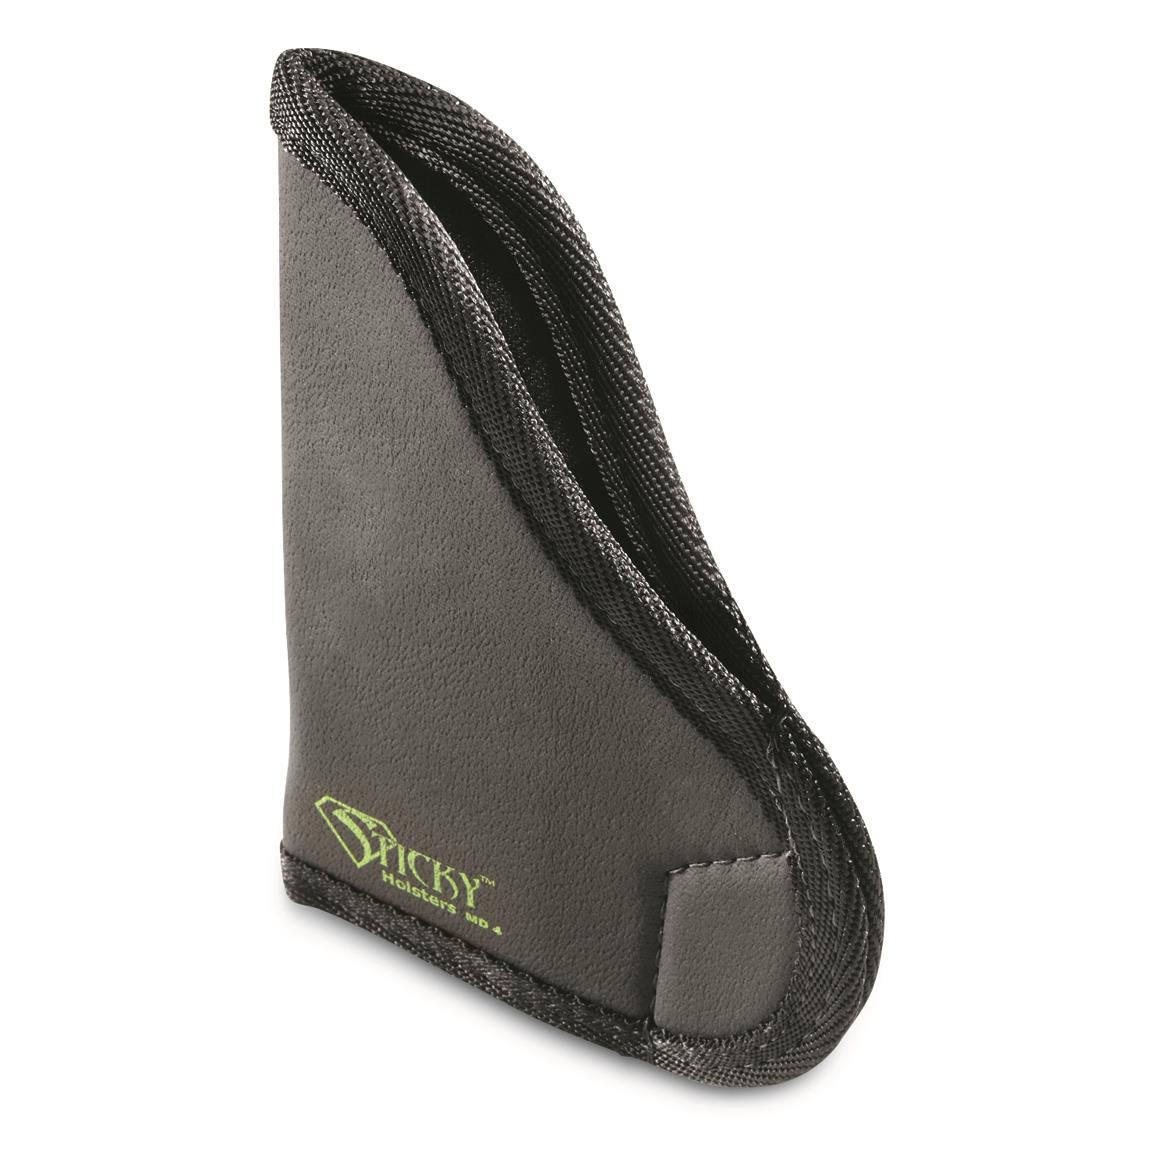 Sticky MD-4 IWB Holster, Sub-Compact Single Stack Medium Autos with up to 3.6” barrel